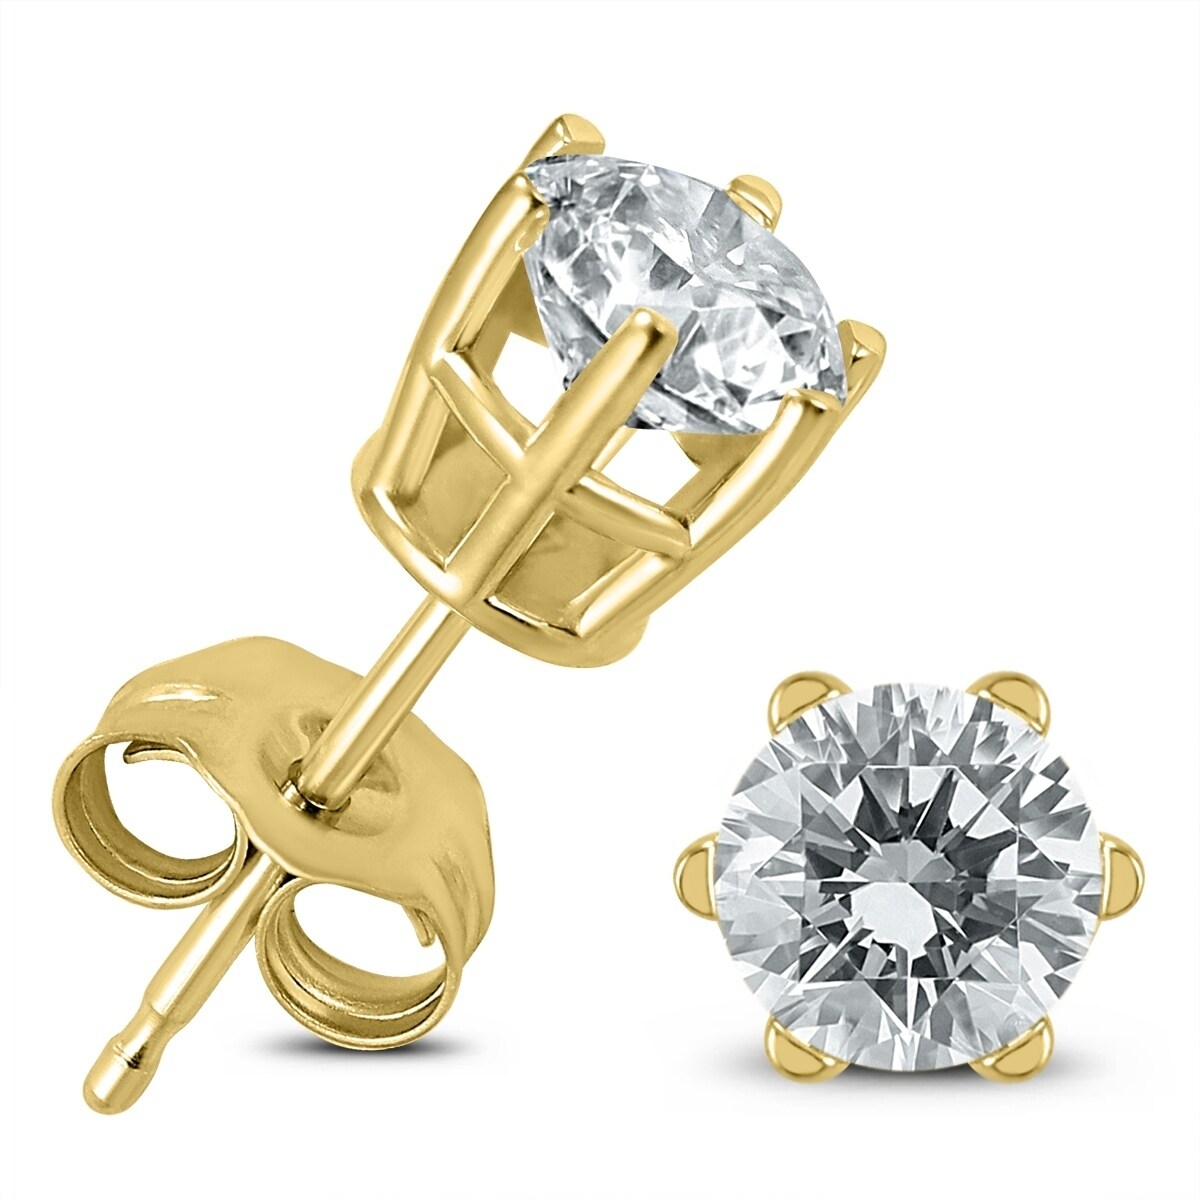 Details about  / 2.00 Ct Round Cut Solitaire Diamond Earring 14K Solid Yellow Gold 6 Prong Stud